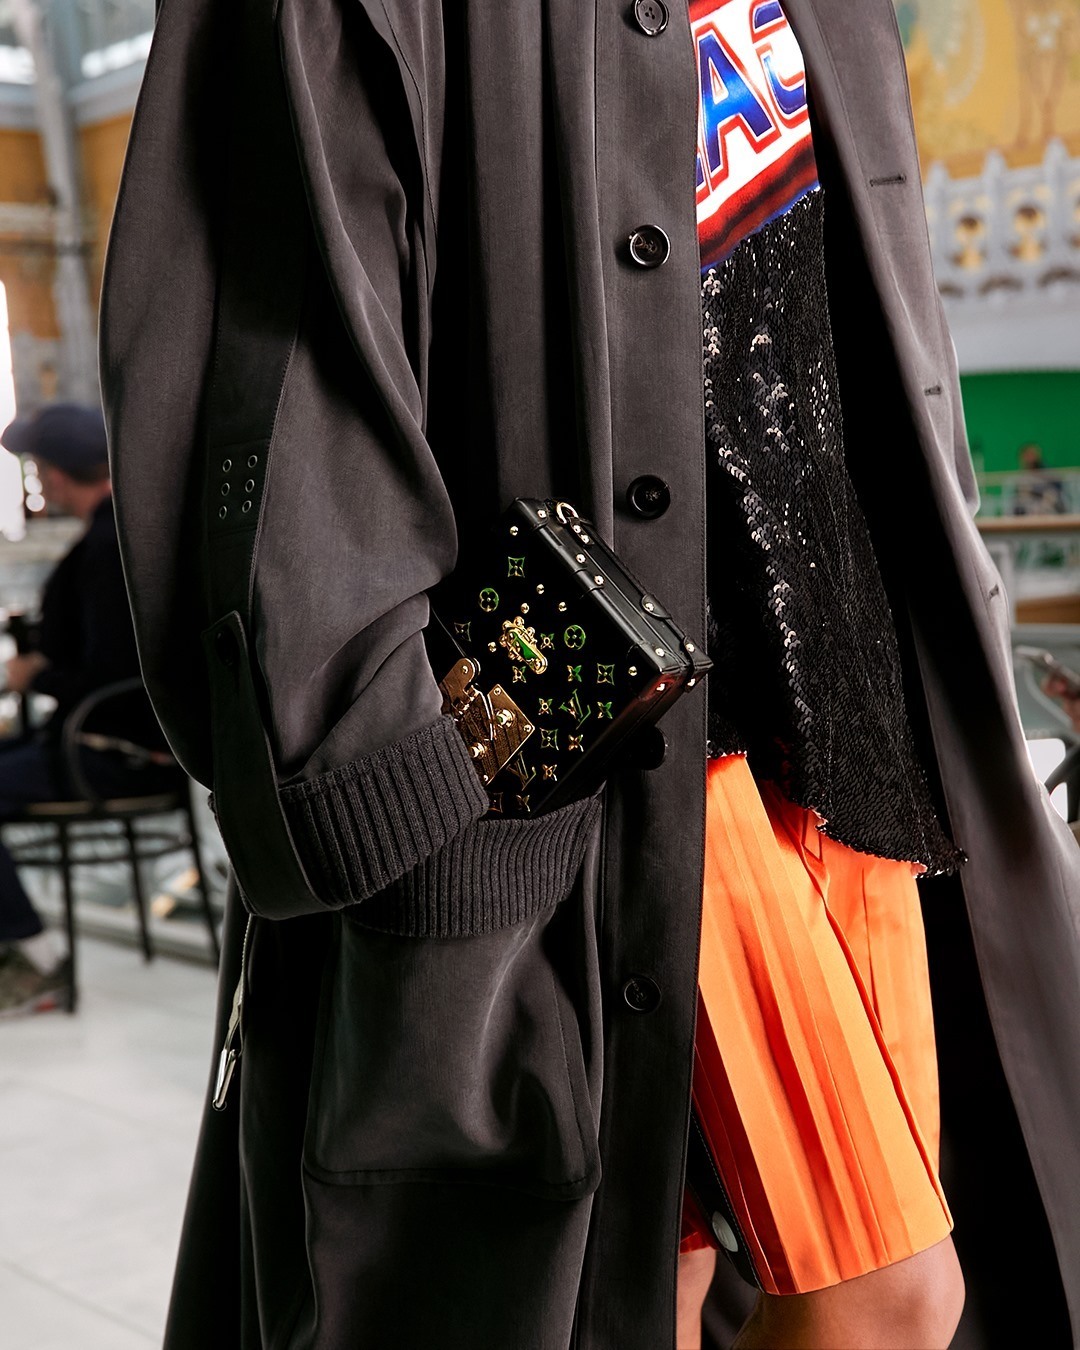 Louis Vuitton - #LVSS21
Deliberate contrasts. A new Petite Malle from @NicolasGhesquiere’s latest #LouisVuitton Collection features a studded Monogram motif. See more from the Fashion Show at louisvui...